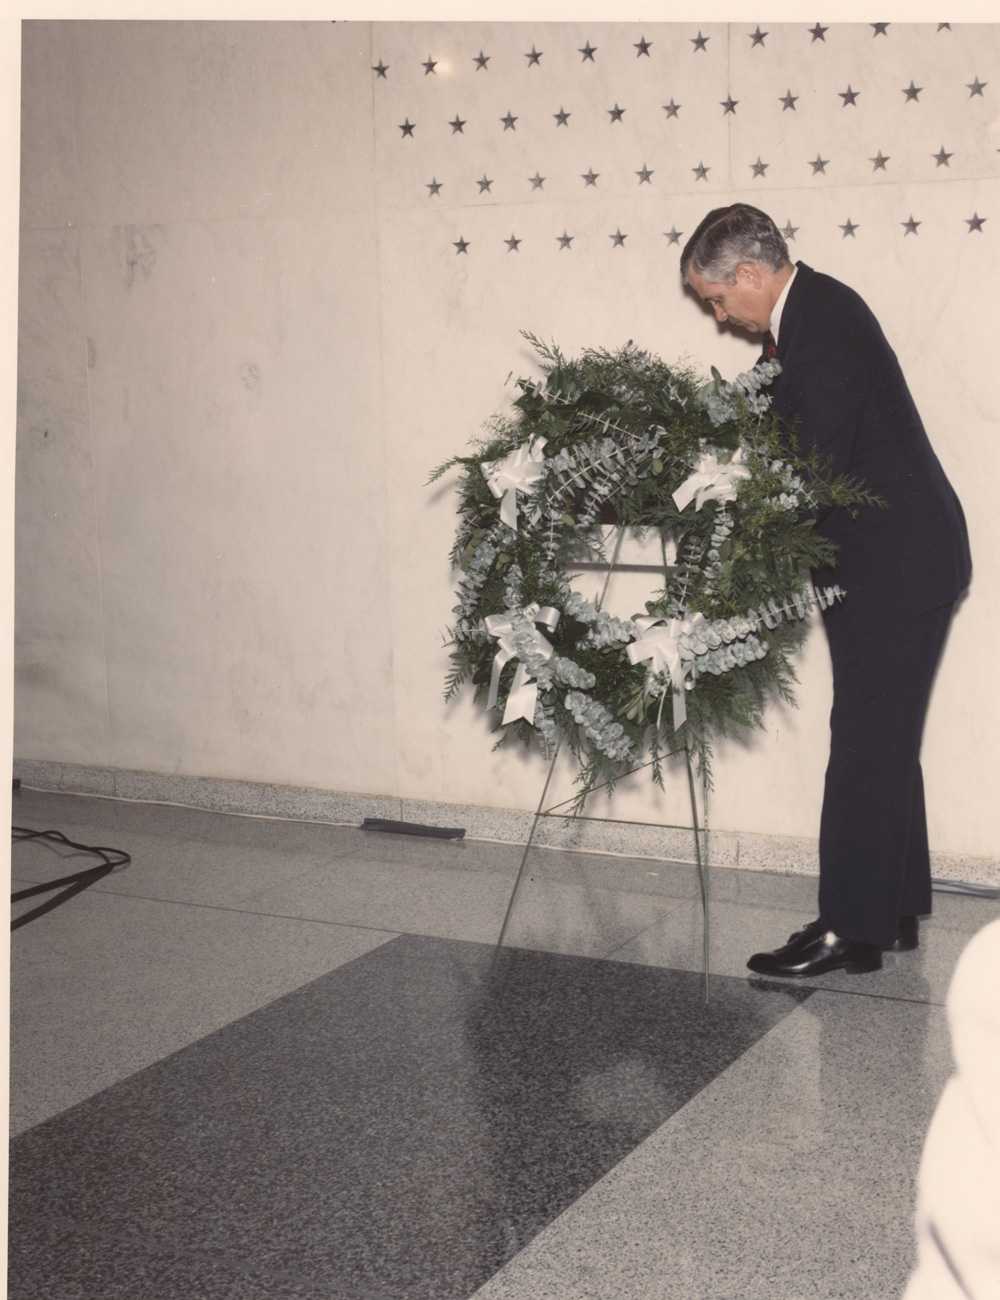 DD/CIA gates laying a wreath on an easel in front of the memorial wall.